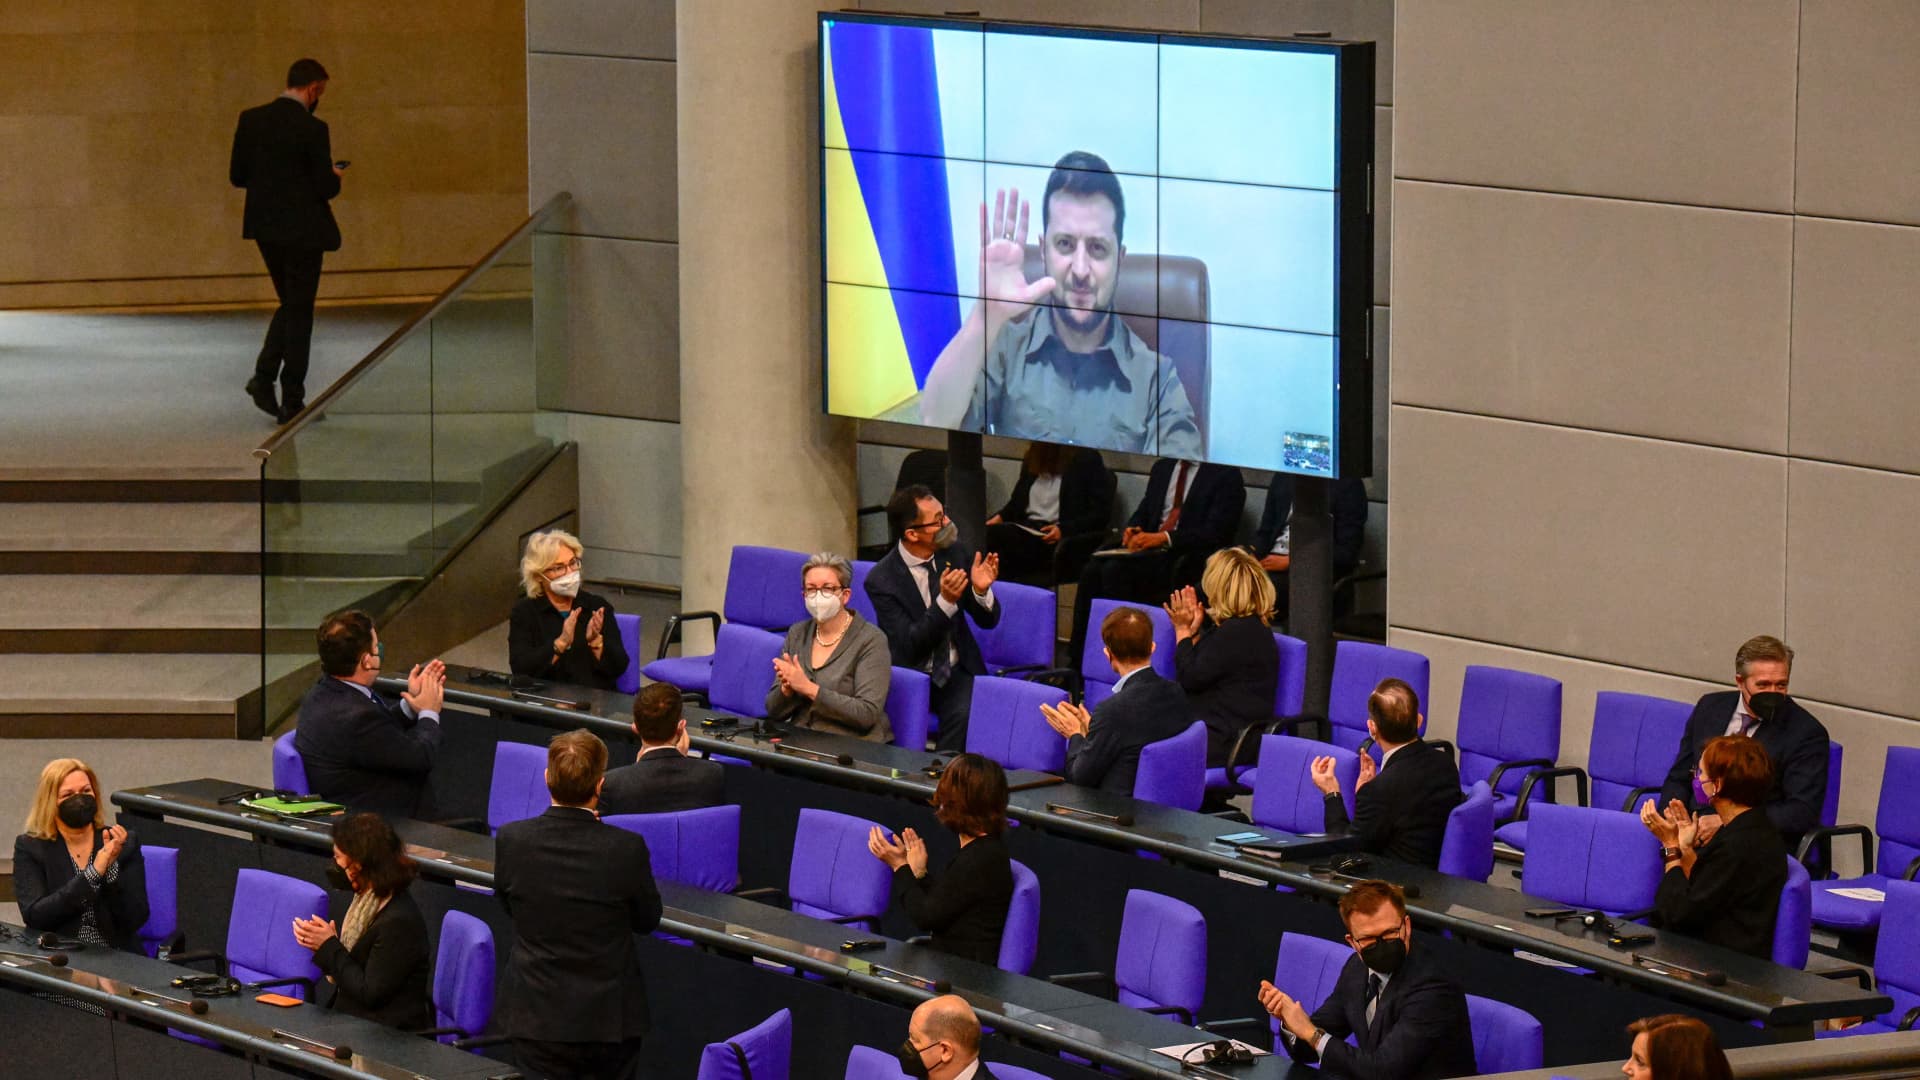 Members of the German government, among them German Chancellor Olaf Scholz applaud as Ukrainian President Volodymyr Zelensky appears on a screen to address via videolink the German lower house of parliament Bundestag, on March 17, 2022 in Berlin.